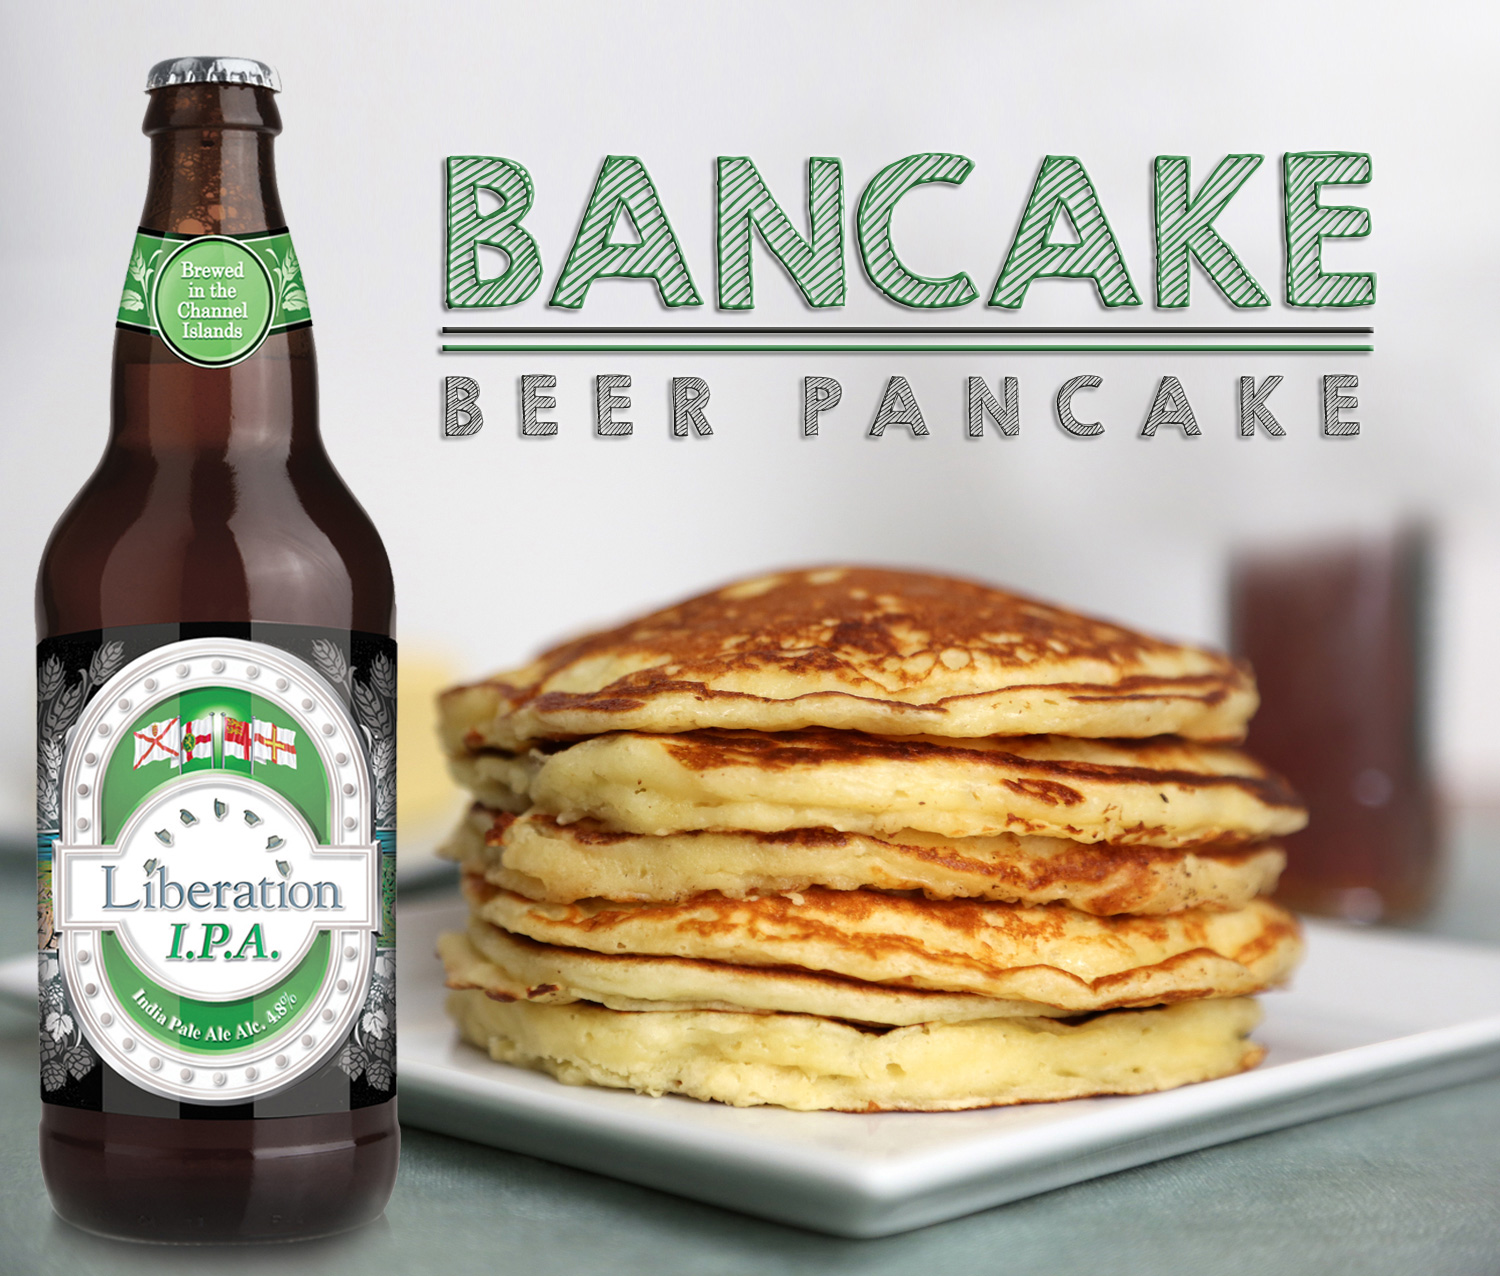 Liberation Brewery's Beer Pancakes